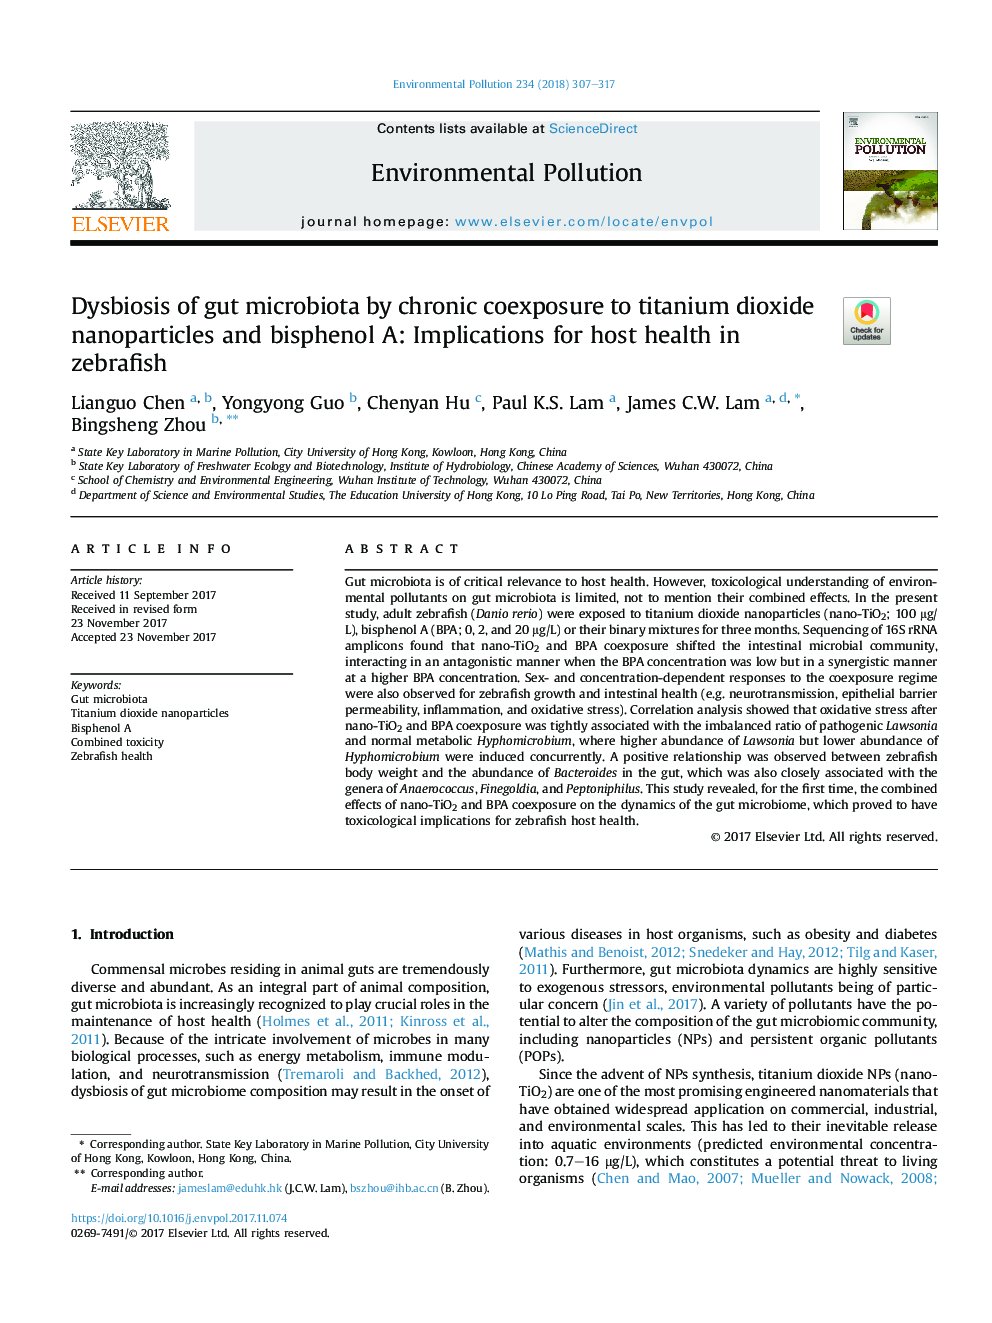 Dysbiosis of gut microbiota by chronic coexposure to titanium dioxide nanoparticles and bisphenol A: Implications for host health in zebrafish